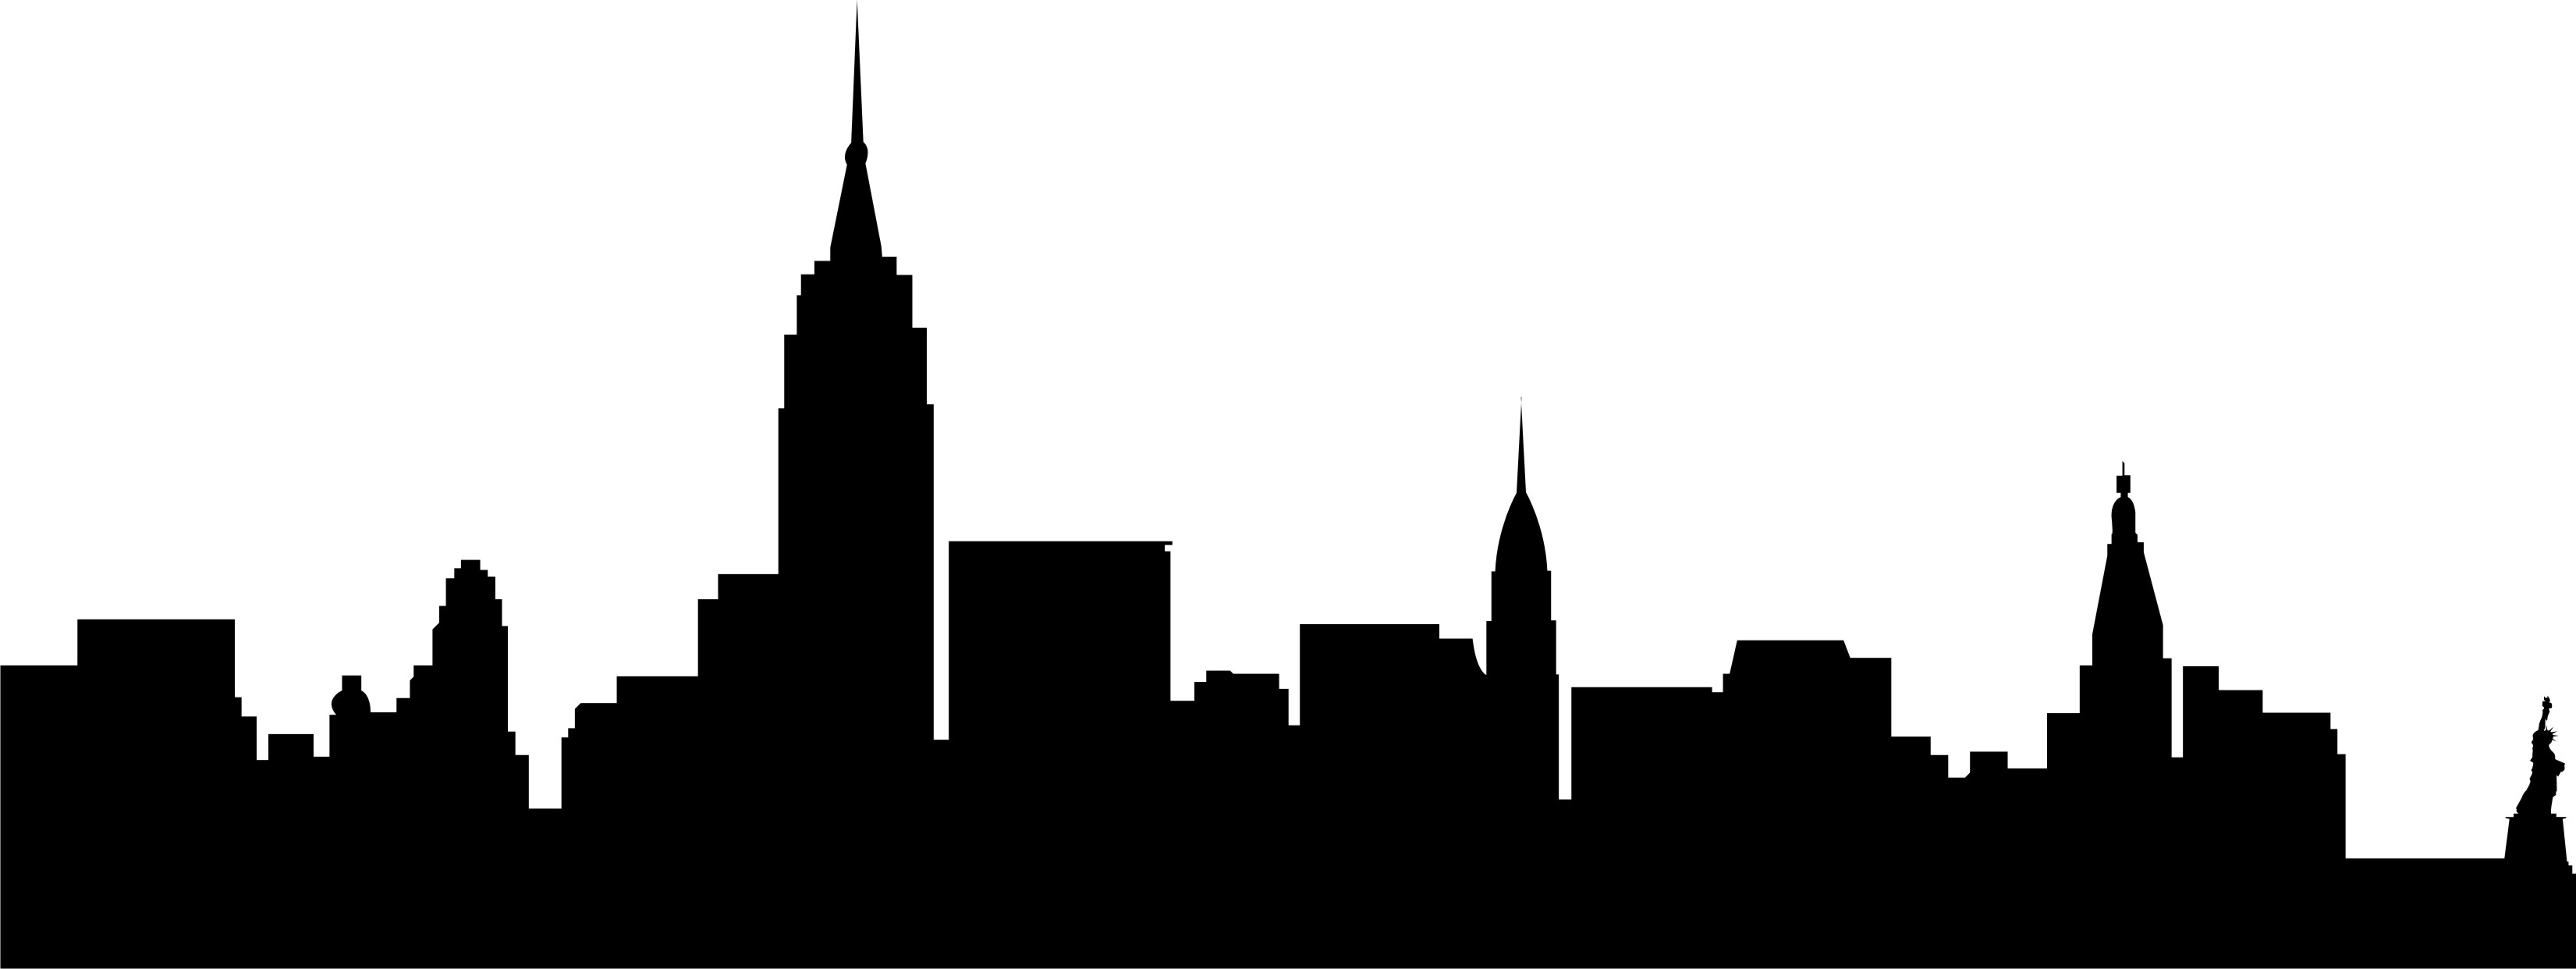 City Skyline Graphic - Cliparts.co